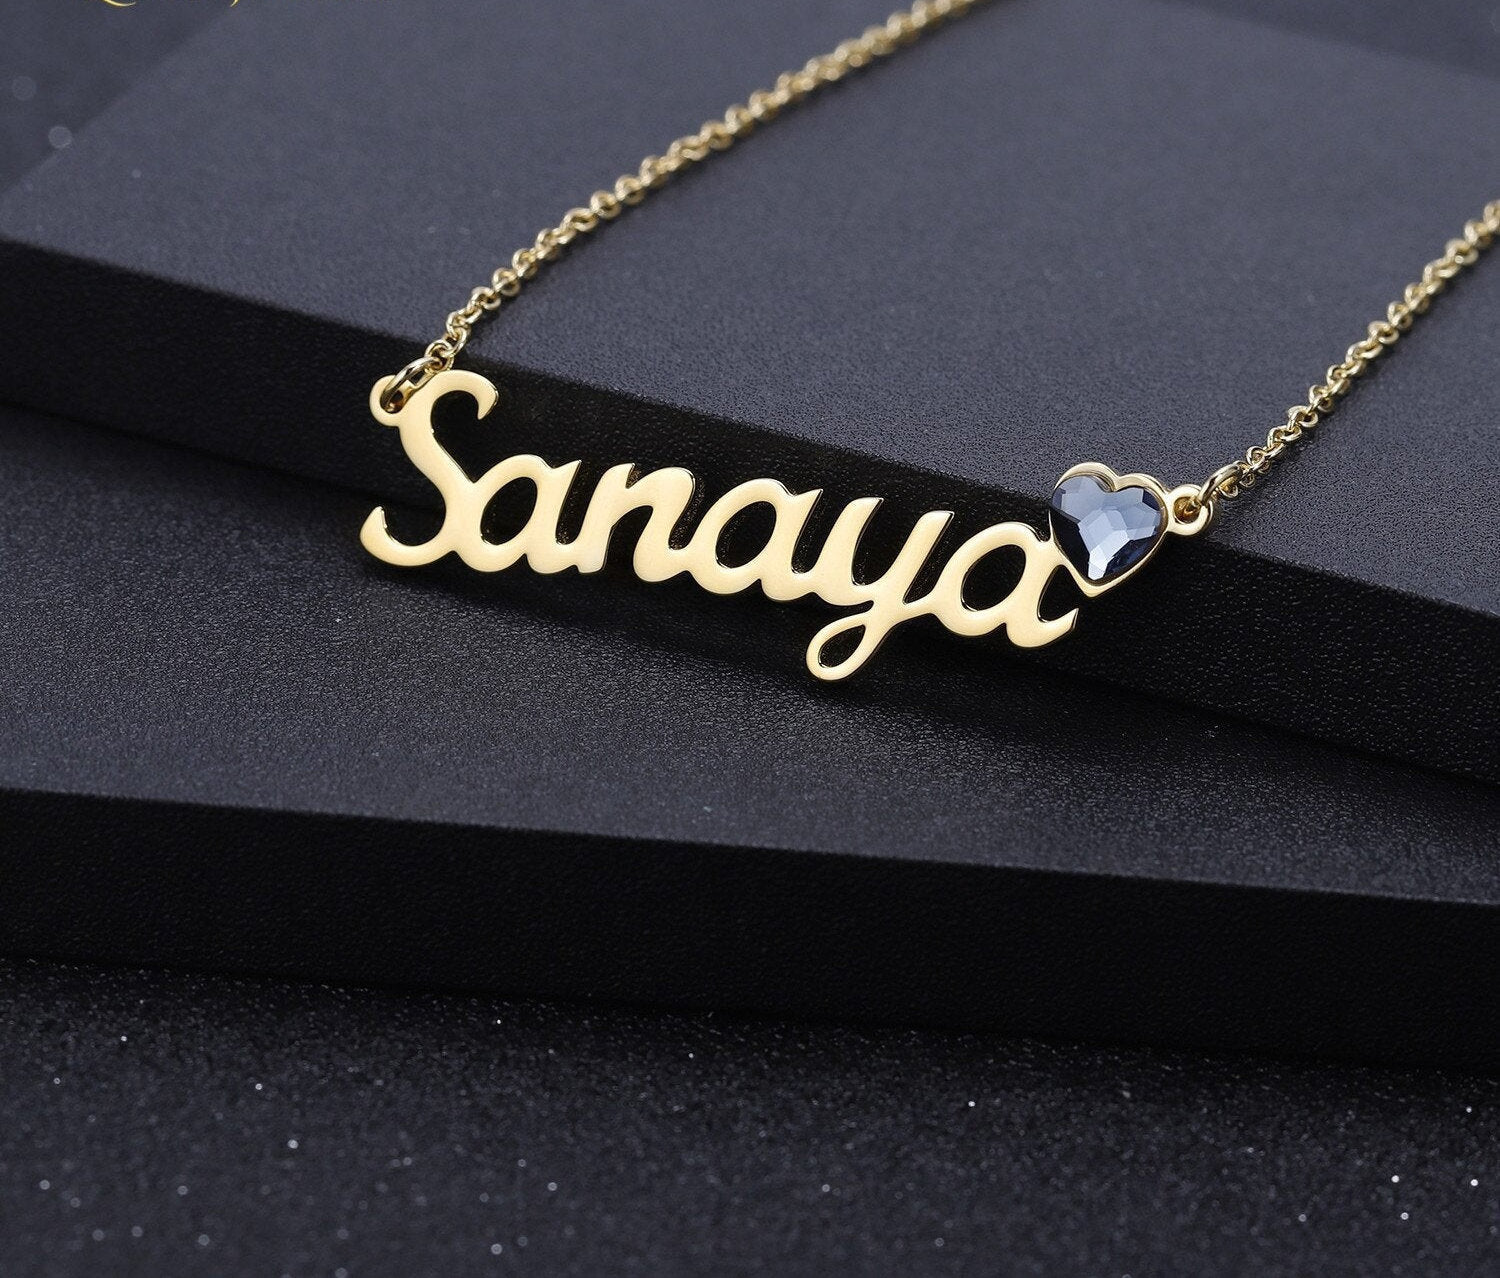 Personalized Name Necklace with Heart Birthstone | Customized Necklace | Dainty Name Necklace | Stainless steel Name Necklace | Jewelry Gift